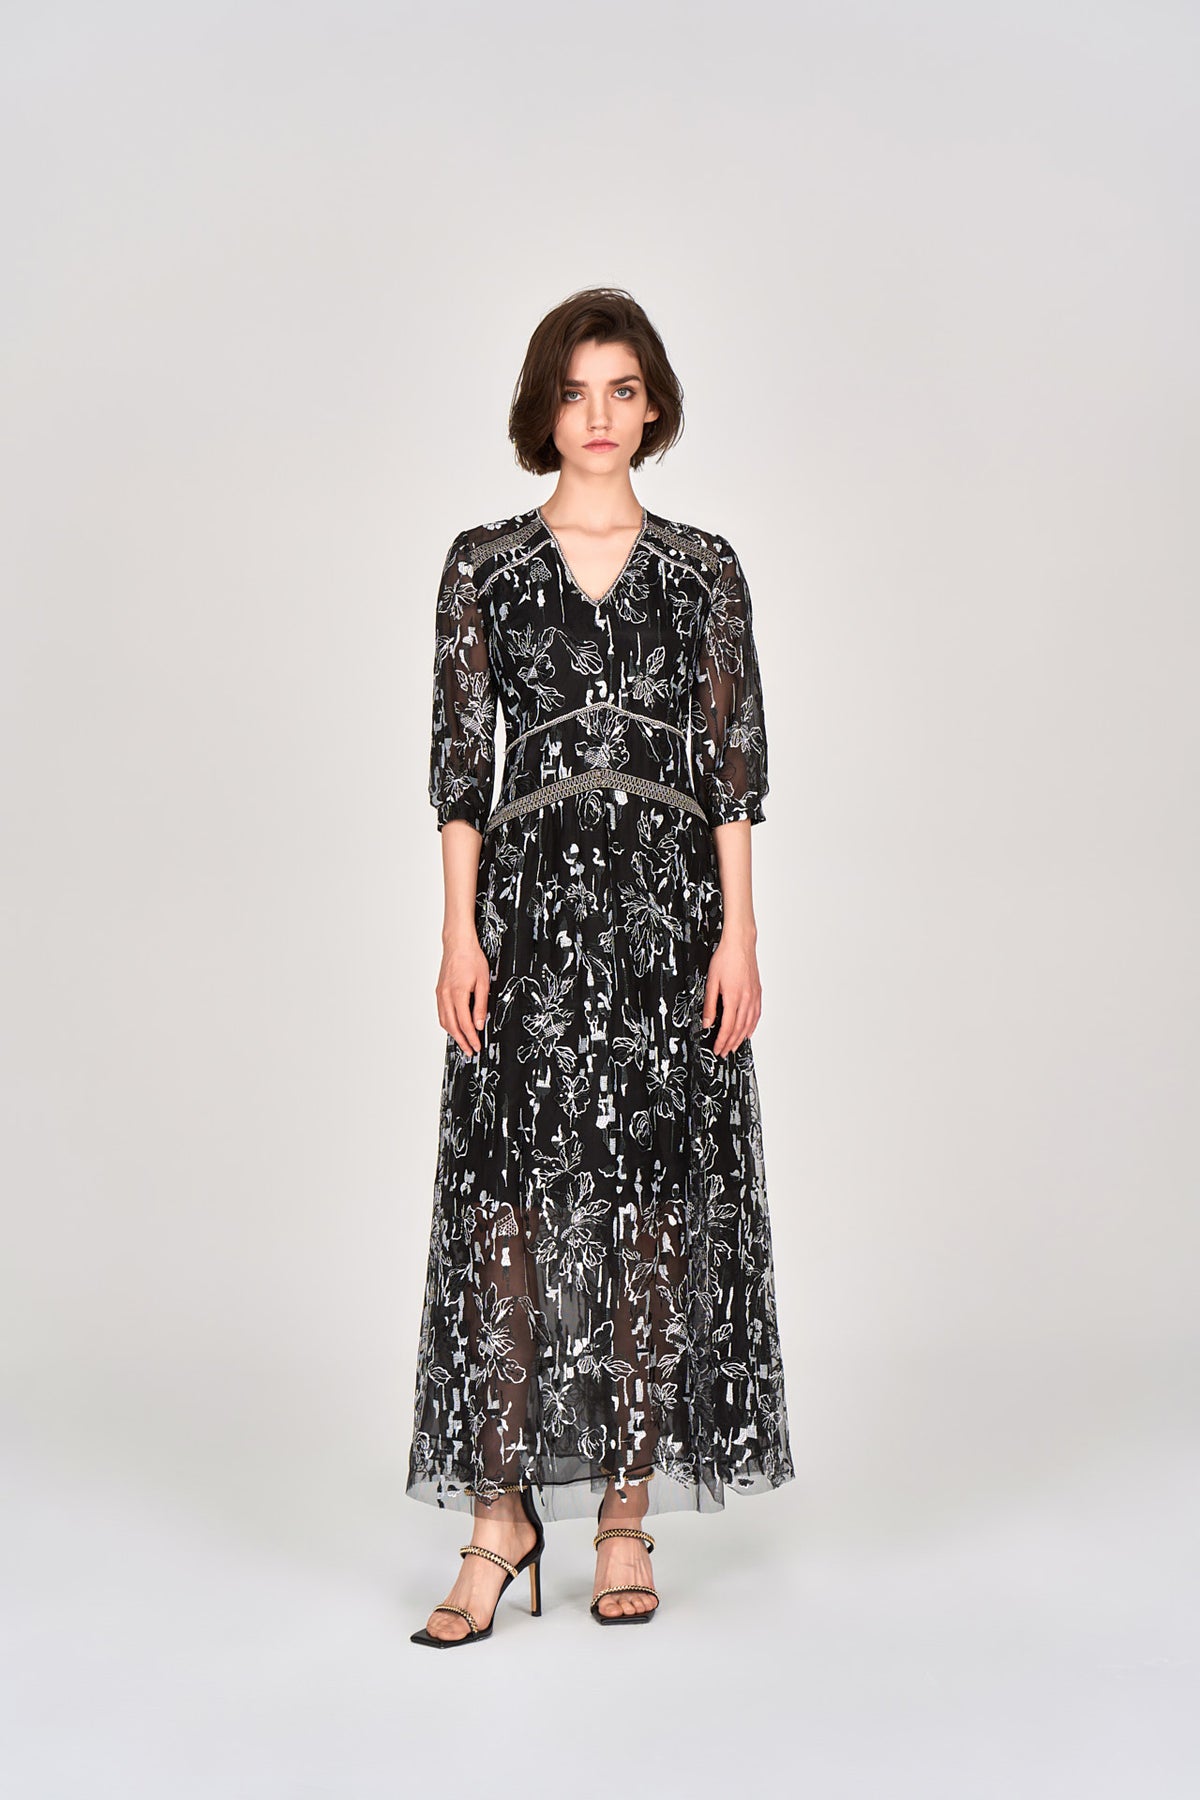 Black Sheer Floral Embroidery Dress